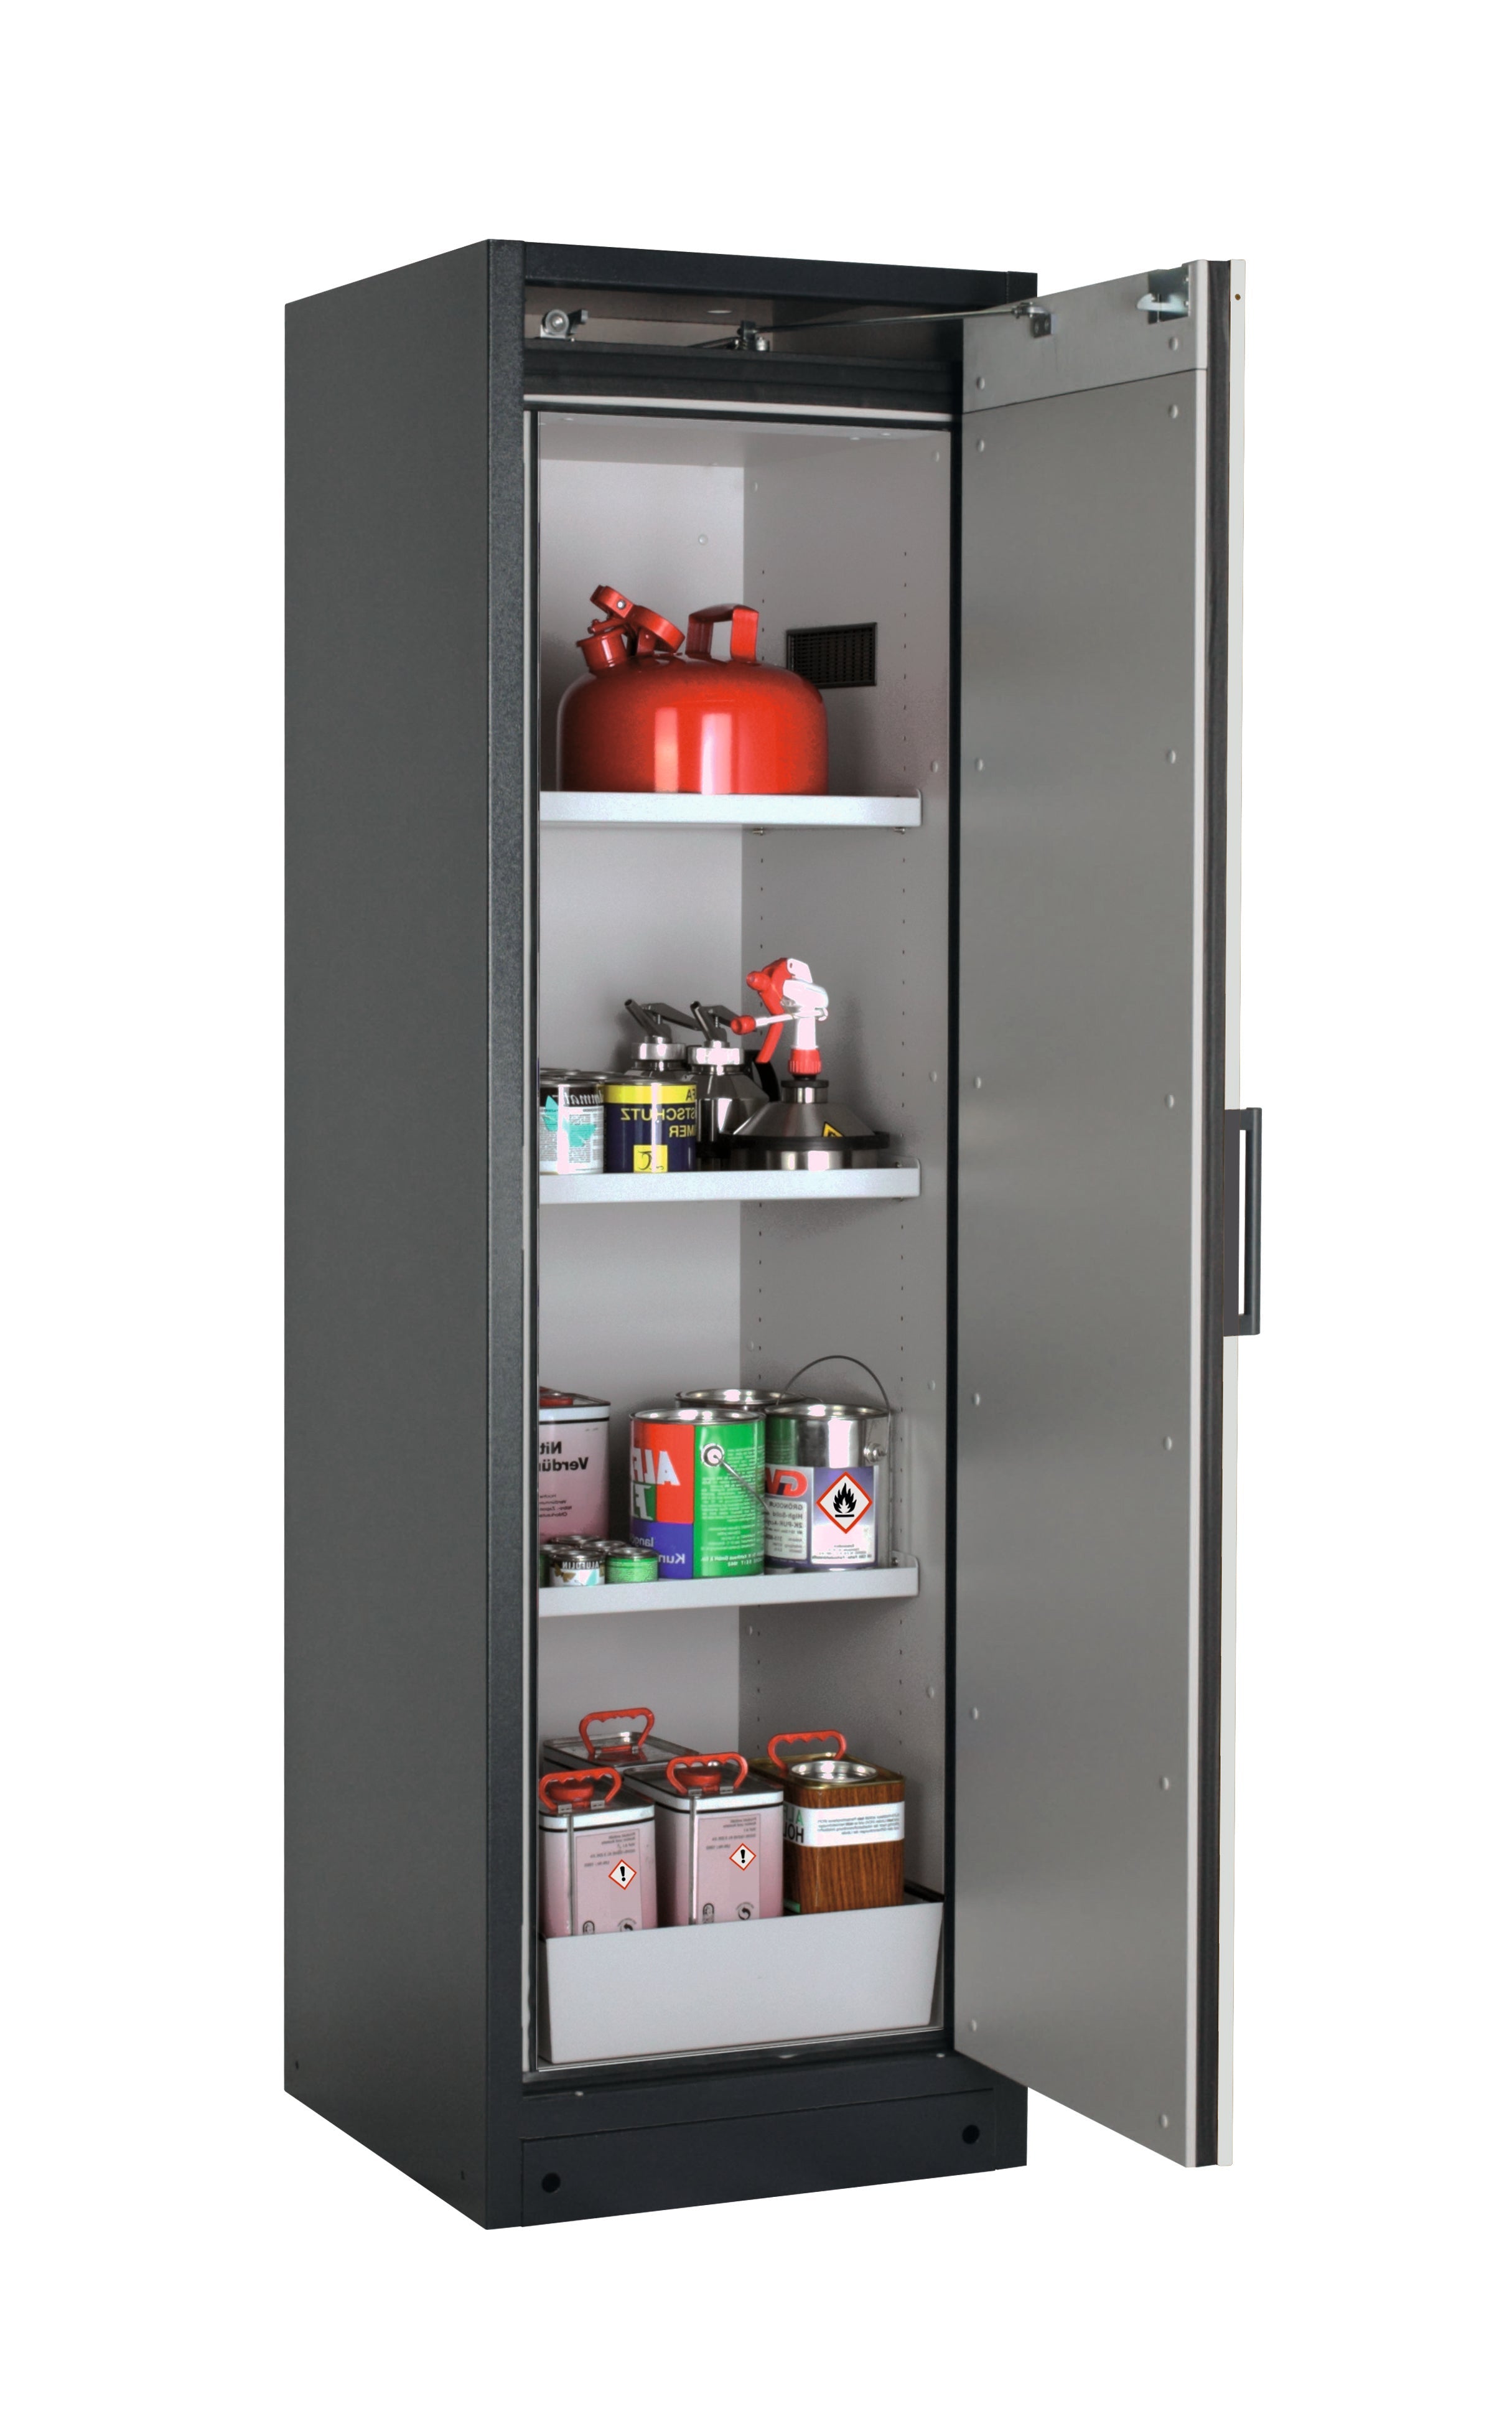 Type 90 safety storage cabinet Q-CLASSIC-90 model Q90.195.060.R in light grey RAL 7035 with 3x shelf standard (sheet steel),